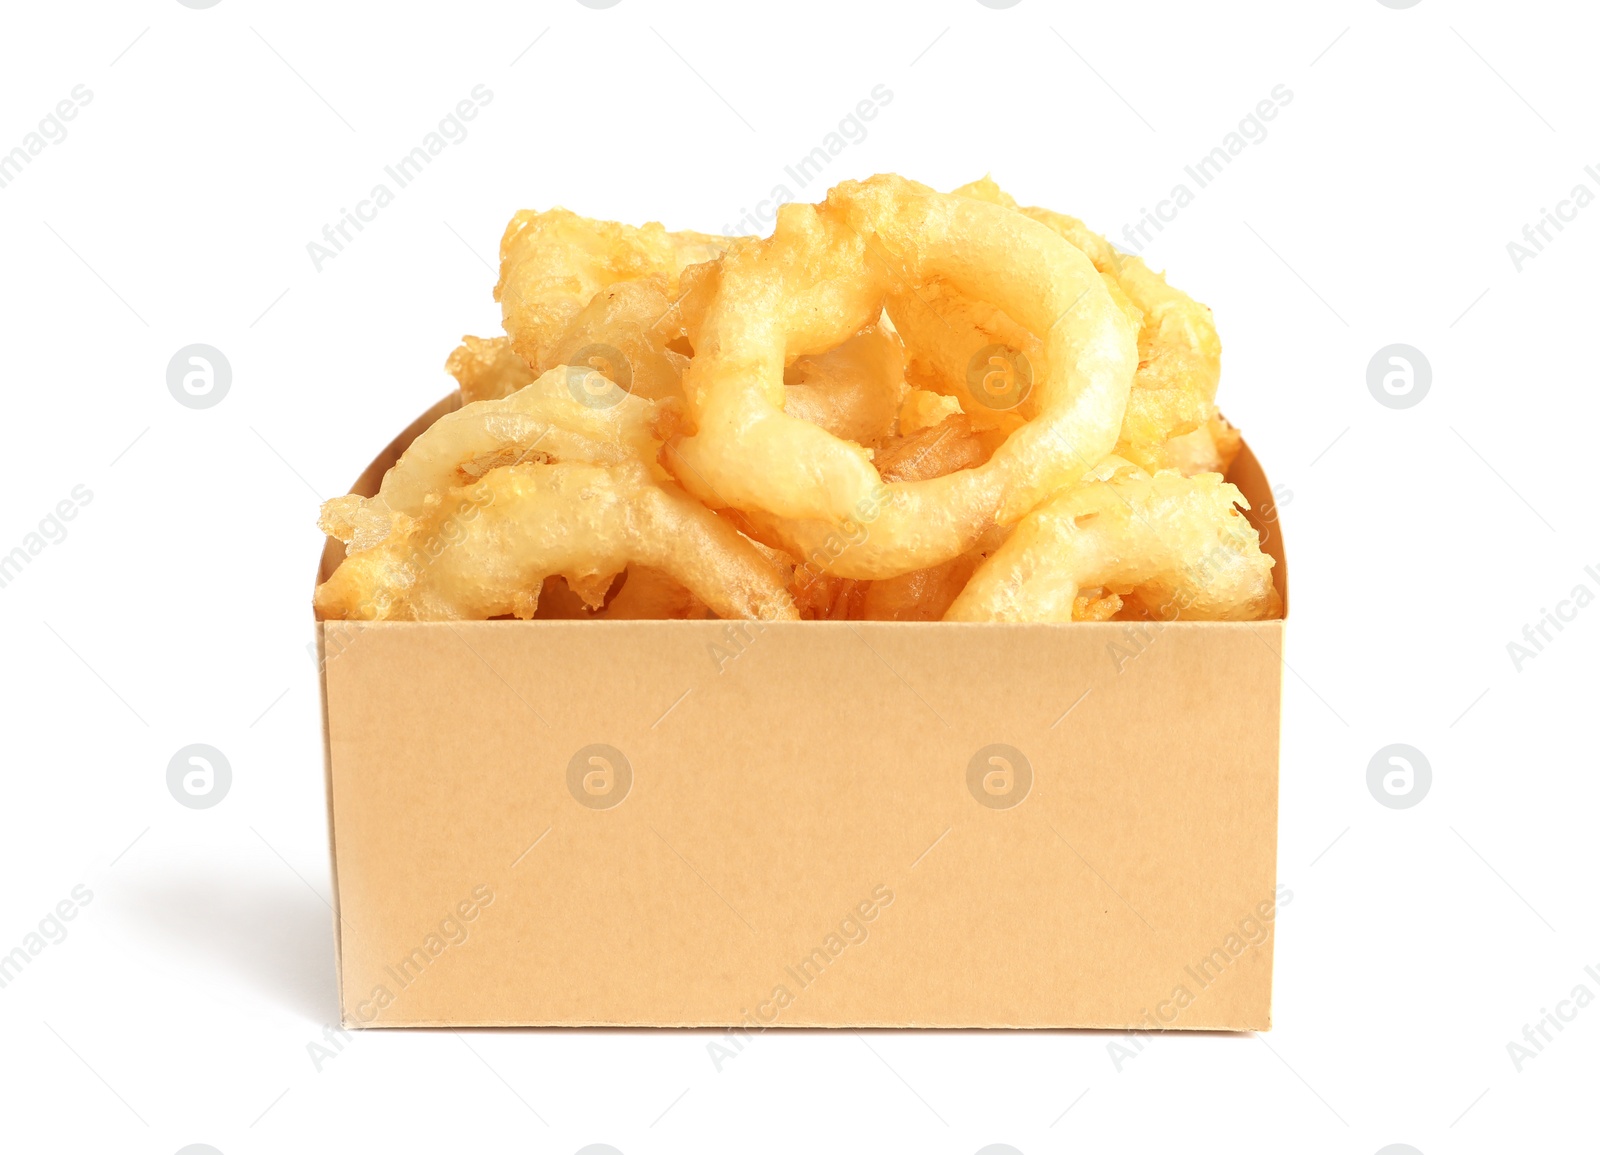 Photo of Delicious golden breaded and deep fried crispy onion rings in cardboard box on white background